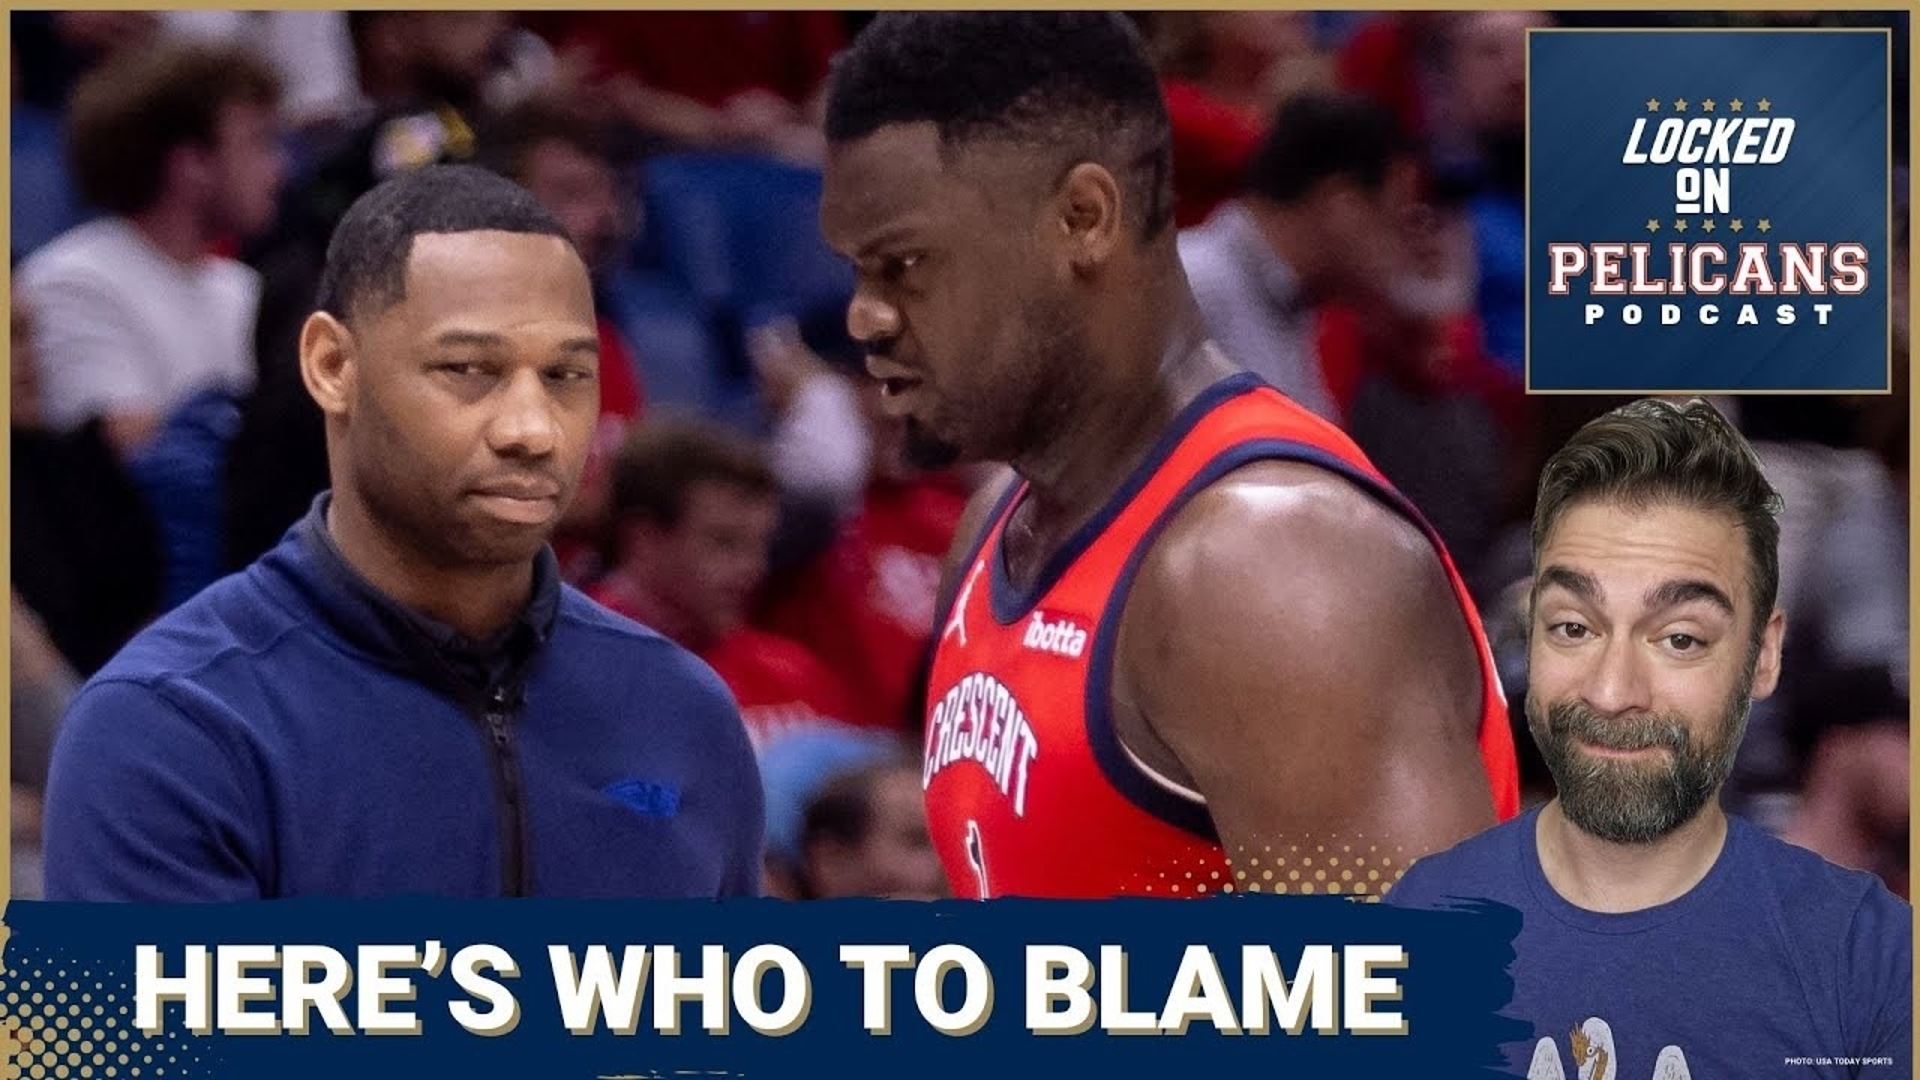 The New Orleans Pelicans struggled on offense for much of this past season and Jake Madison tells you who to blame.